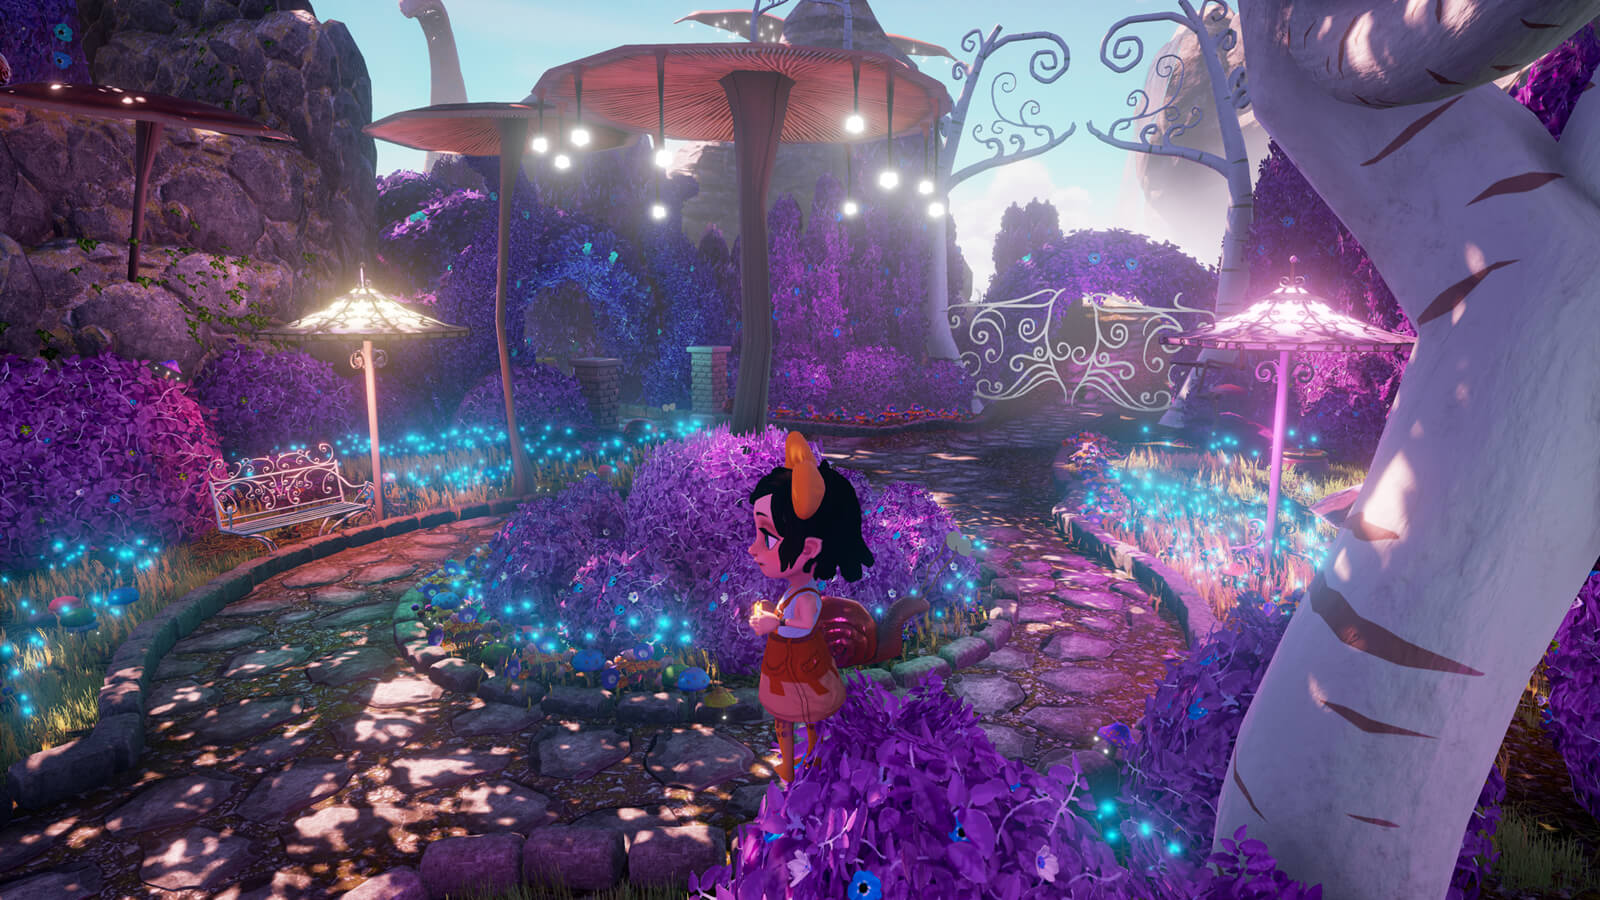 Melanie stands on a circular path full of purple foliage and glowing mushrooms. A snail crawls behind her. 